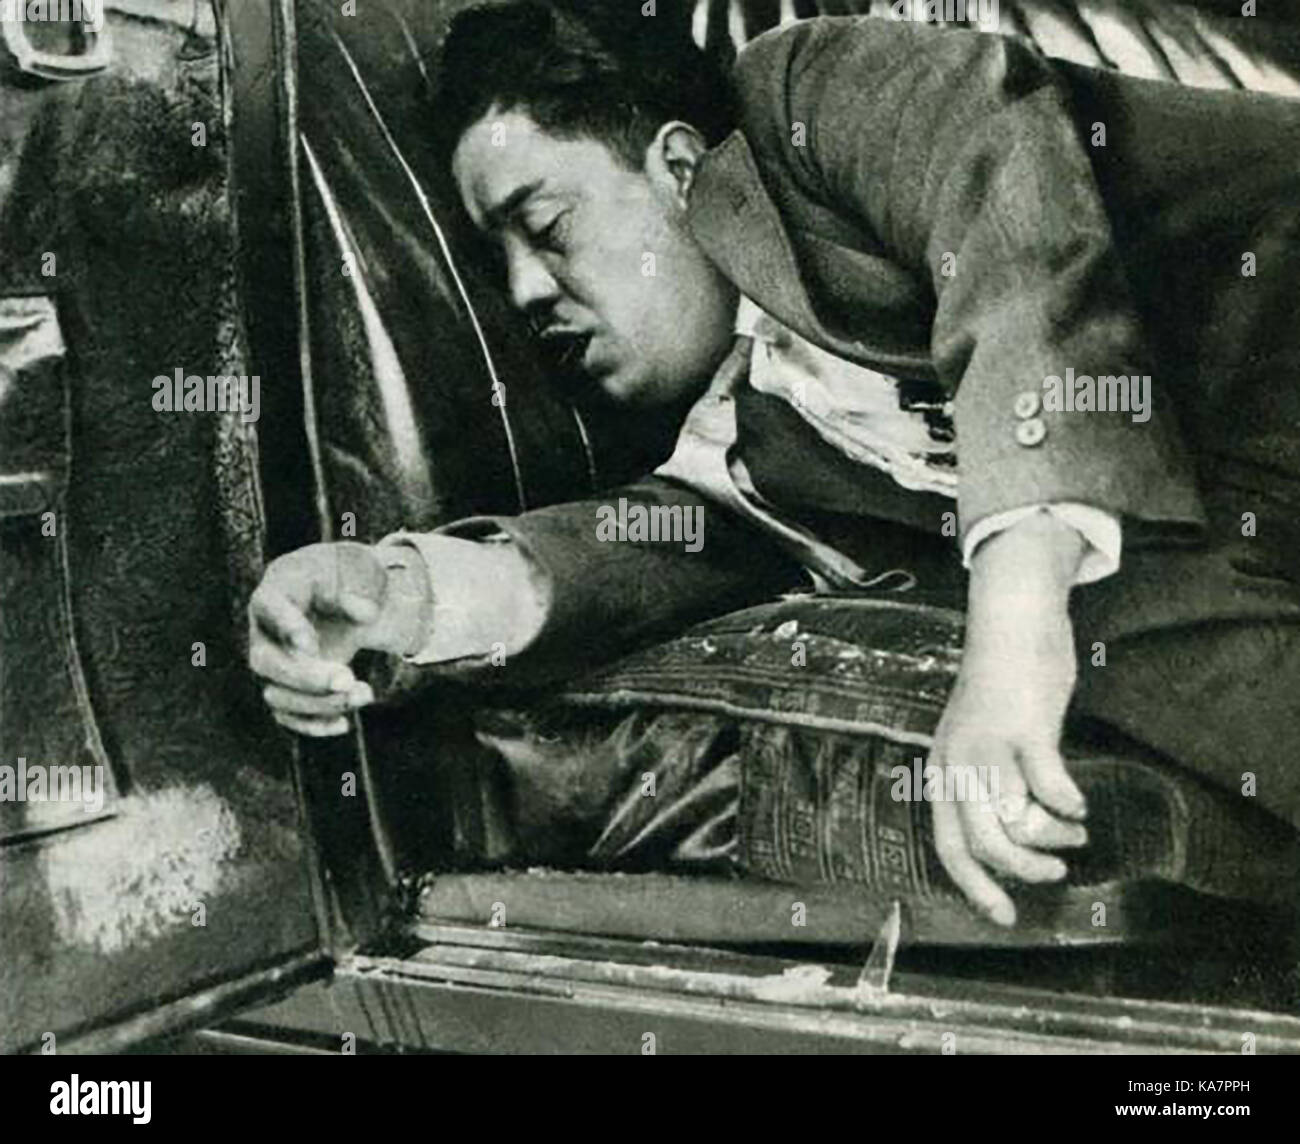 CRIME 1929 - USA - Chicago gangland killing - An official vintage police photograph of Mexican  Nemesio Monroy who was shot dead whilst guarding the Agua Caliente 'money car' containing $85,800 - Stock Photo